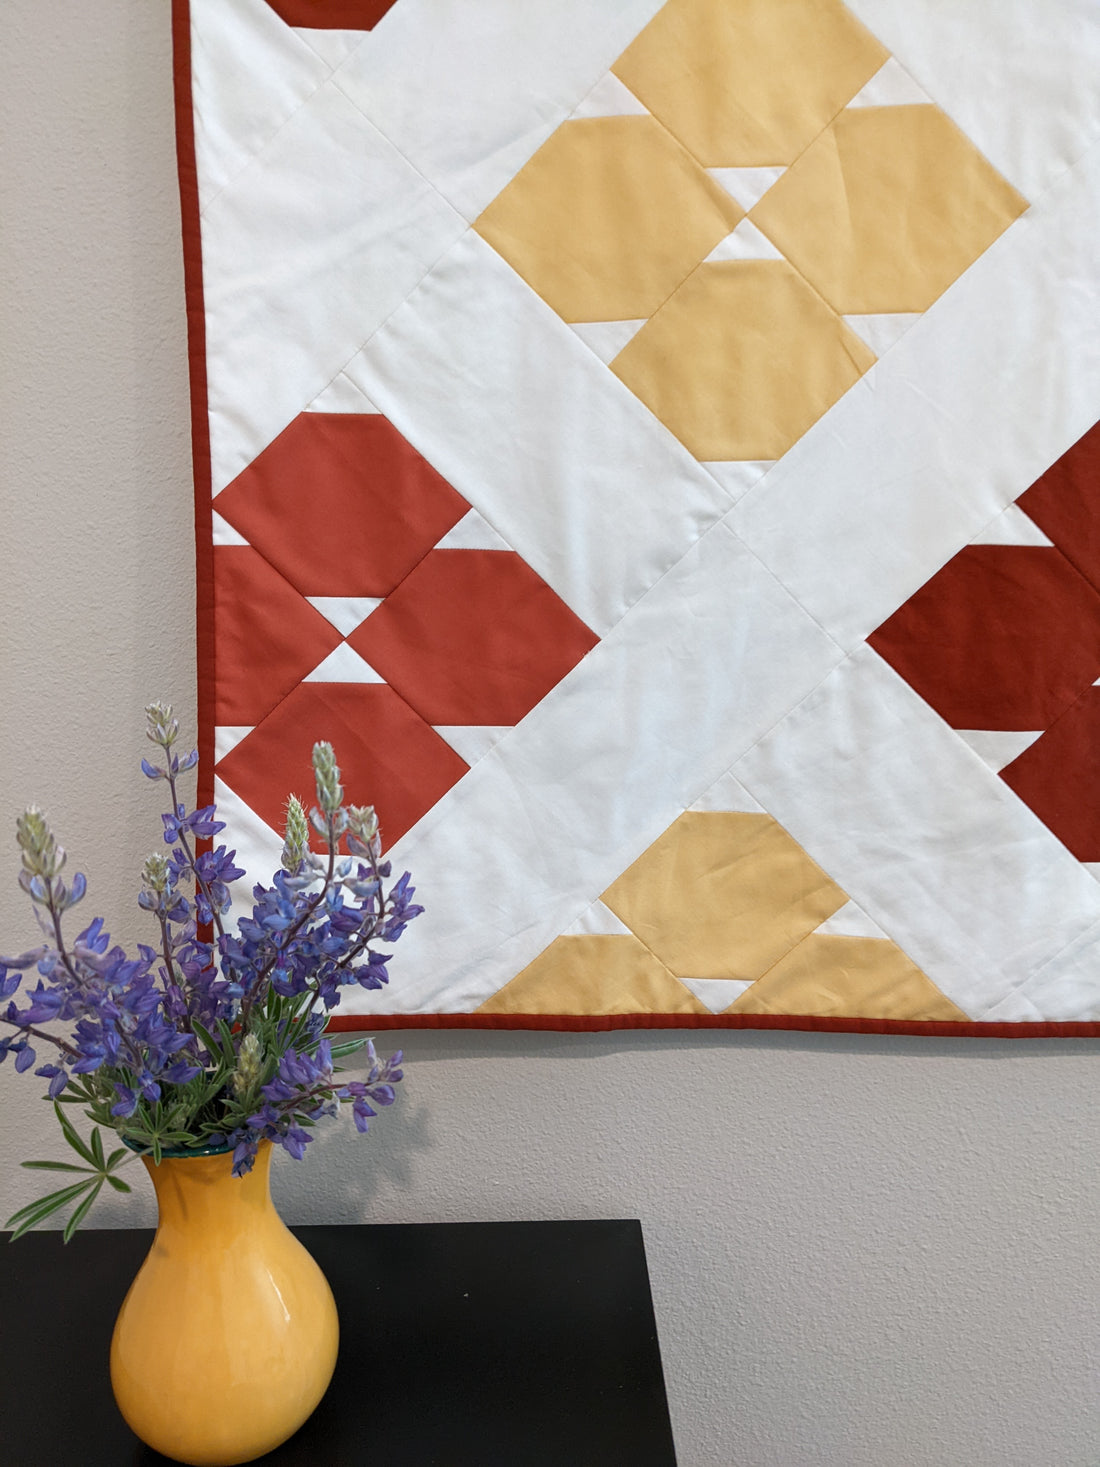 Yellow, pink orange and white quilt with purple flowers in yellow vase.